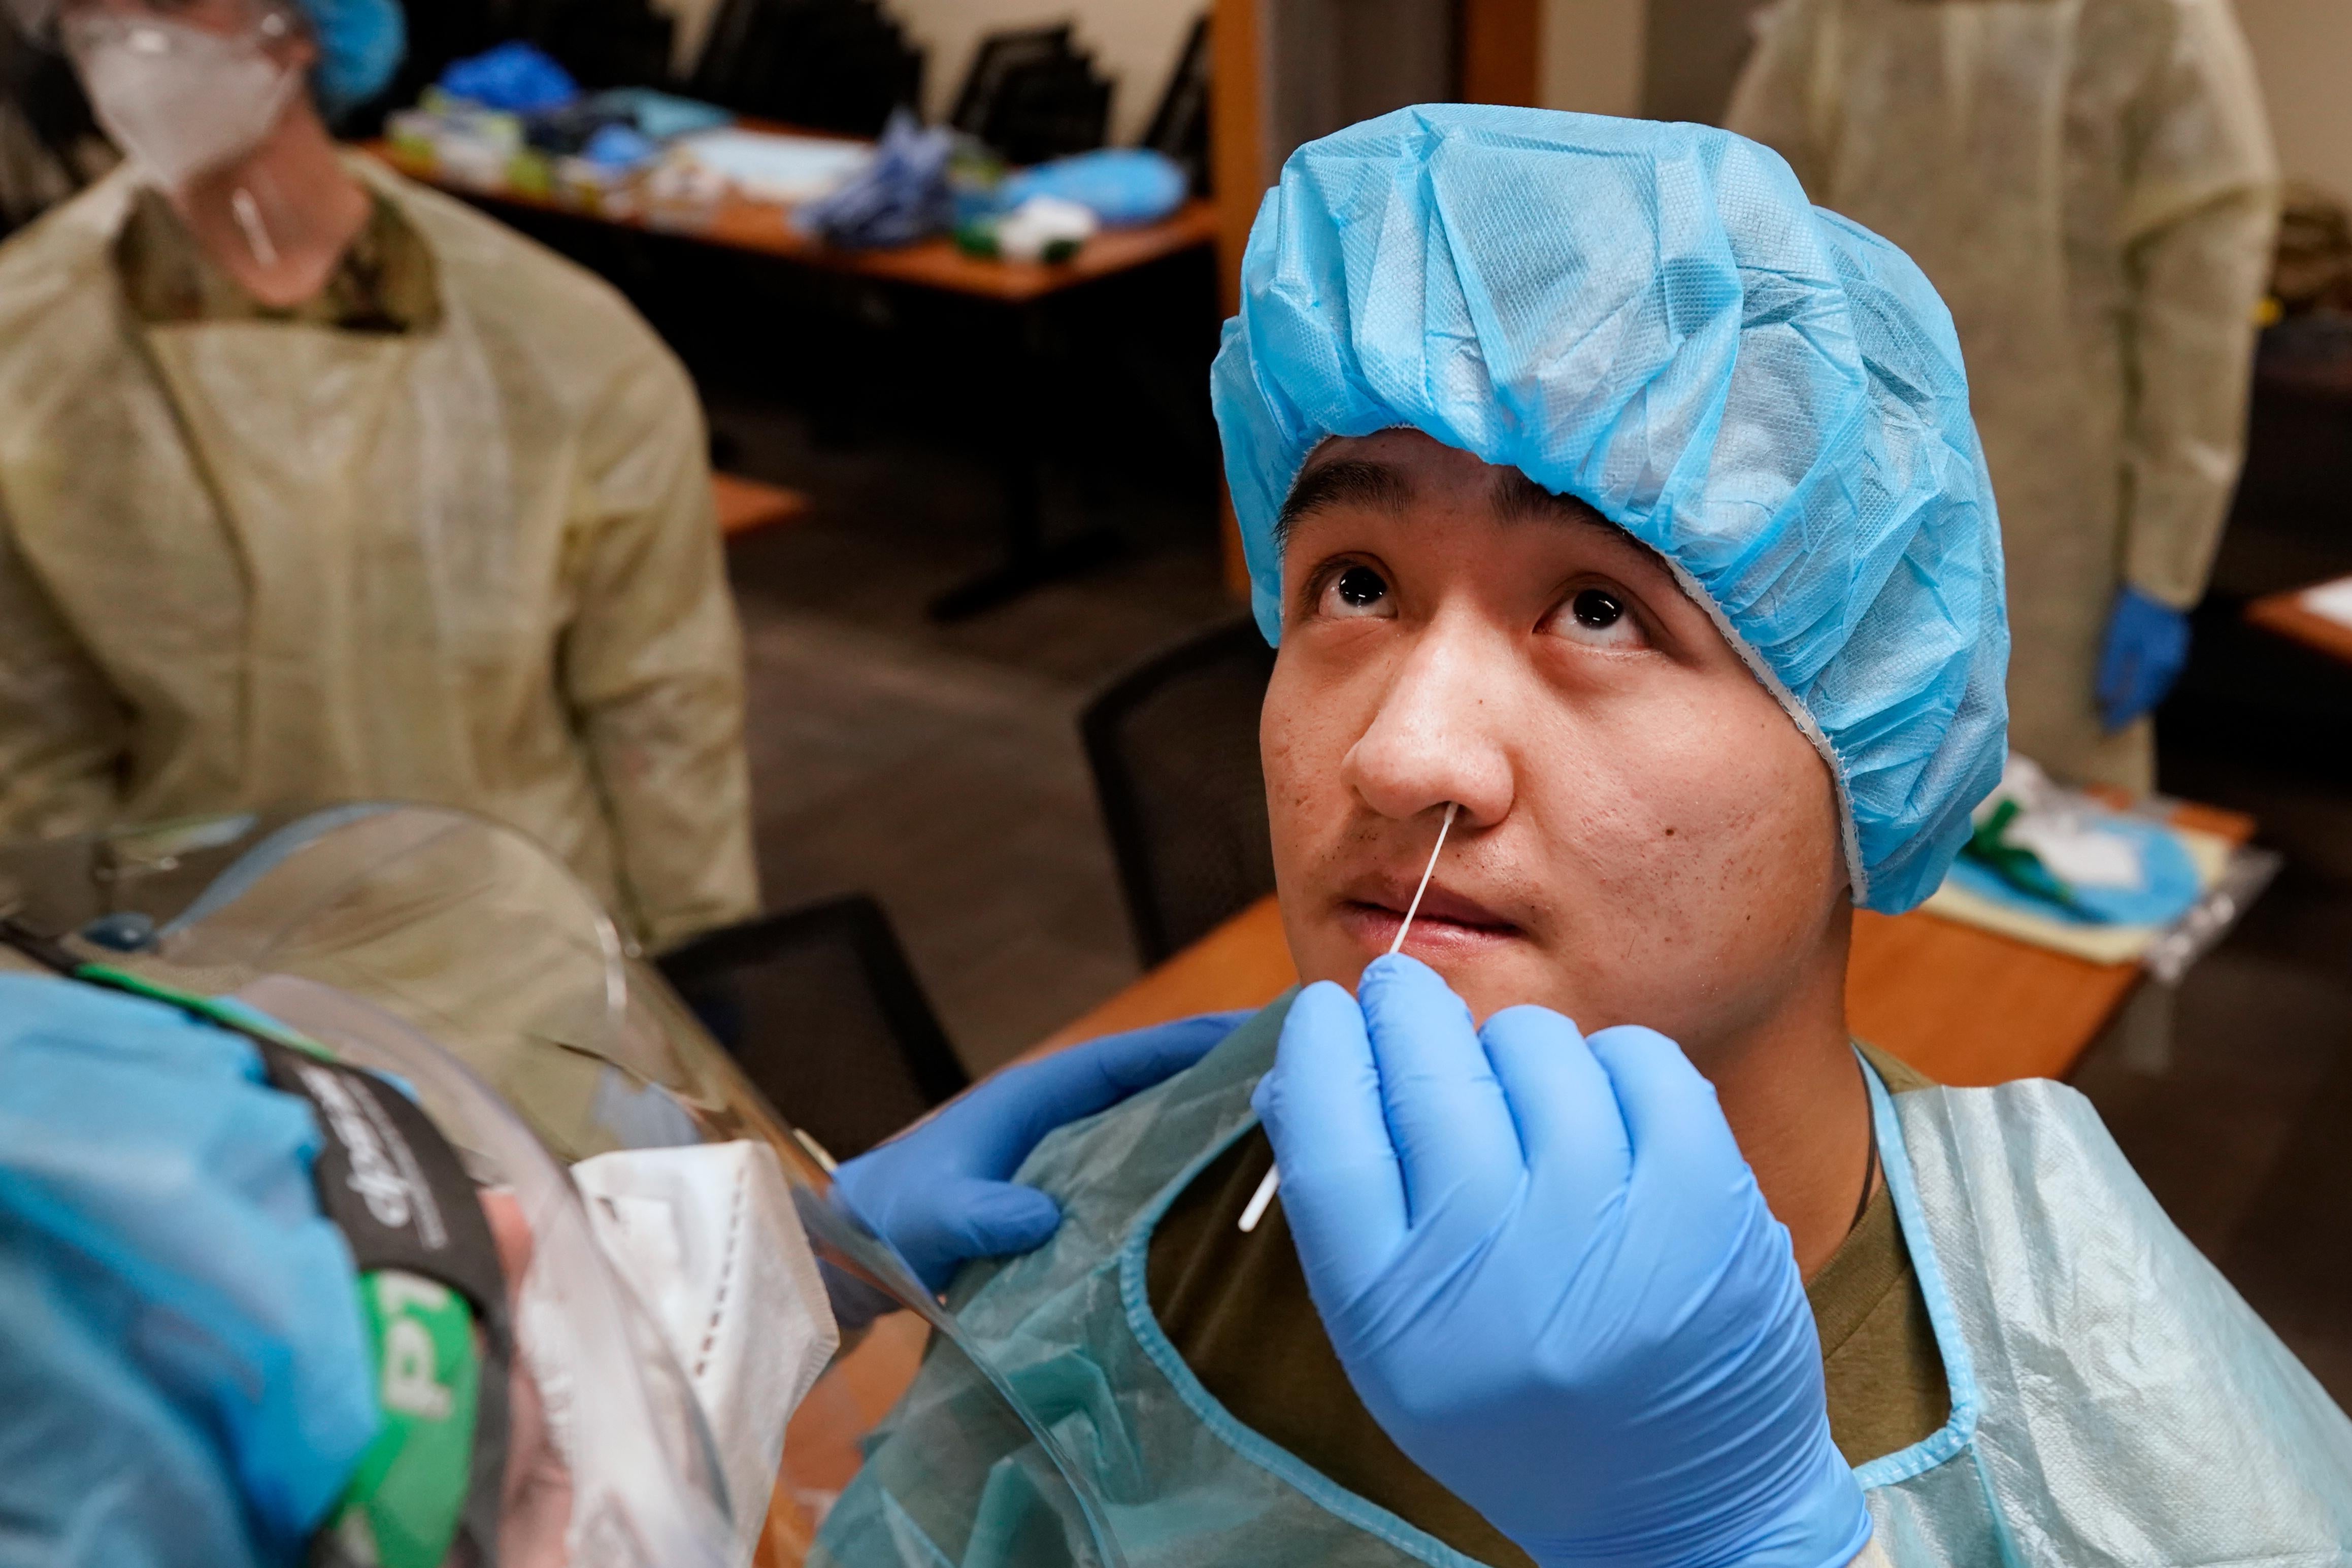 A Utah National Guard member wearing PPE inserts a swab in the nose of another member in PPE to test for COVID-19, with others wearing PPE in the background